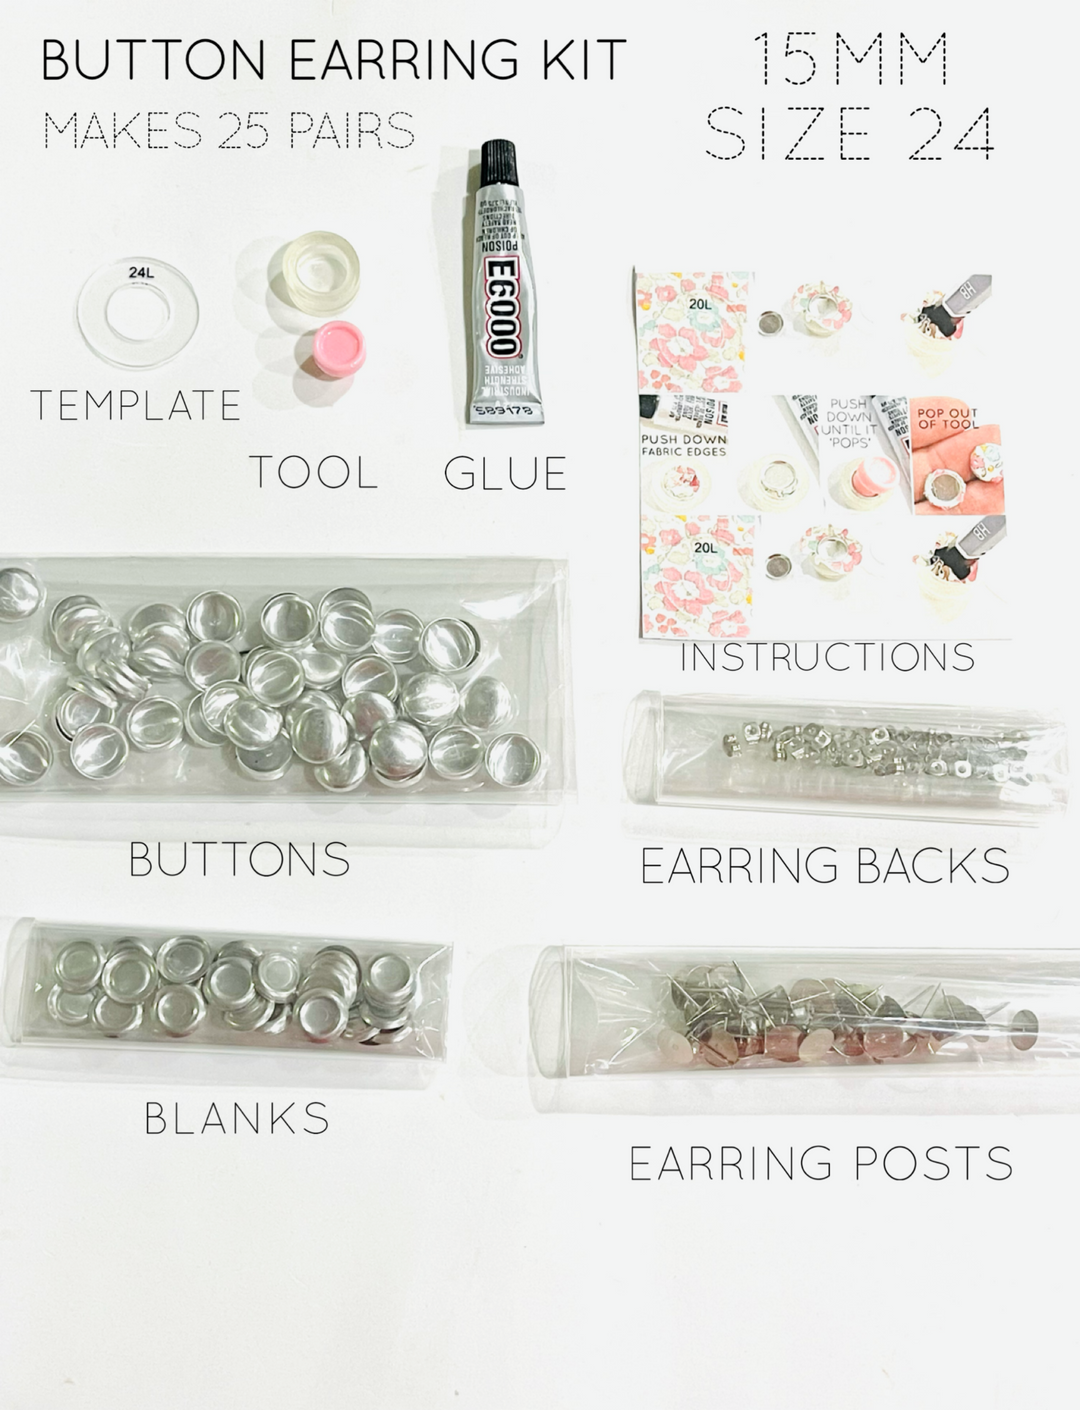 15mm Button Earring Self Cover Starter Kit - 25/50/100 Pairs - Oliver and May Everyday Range